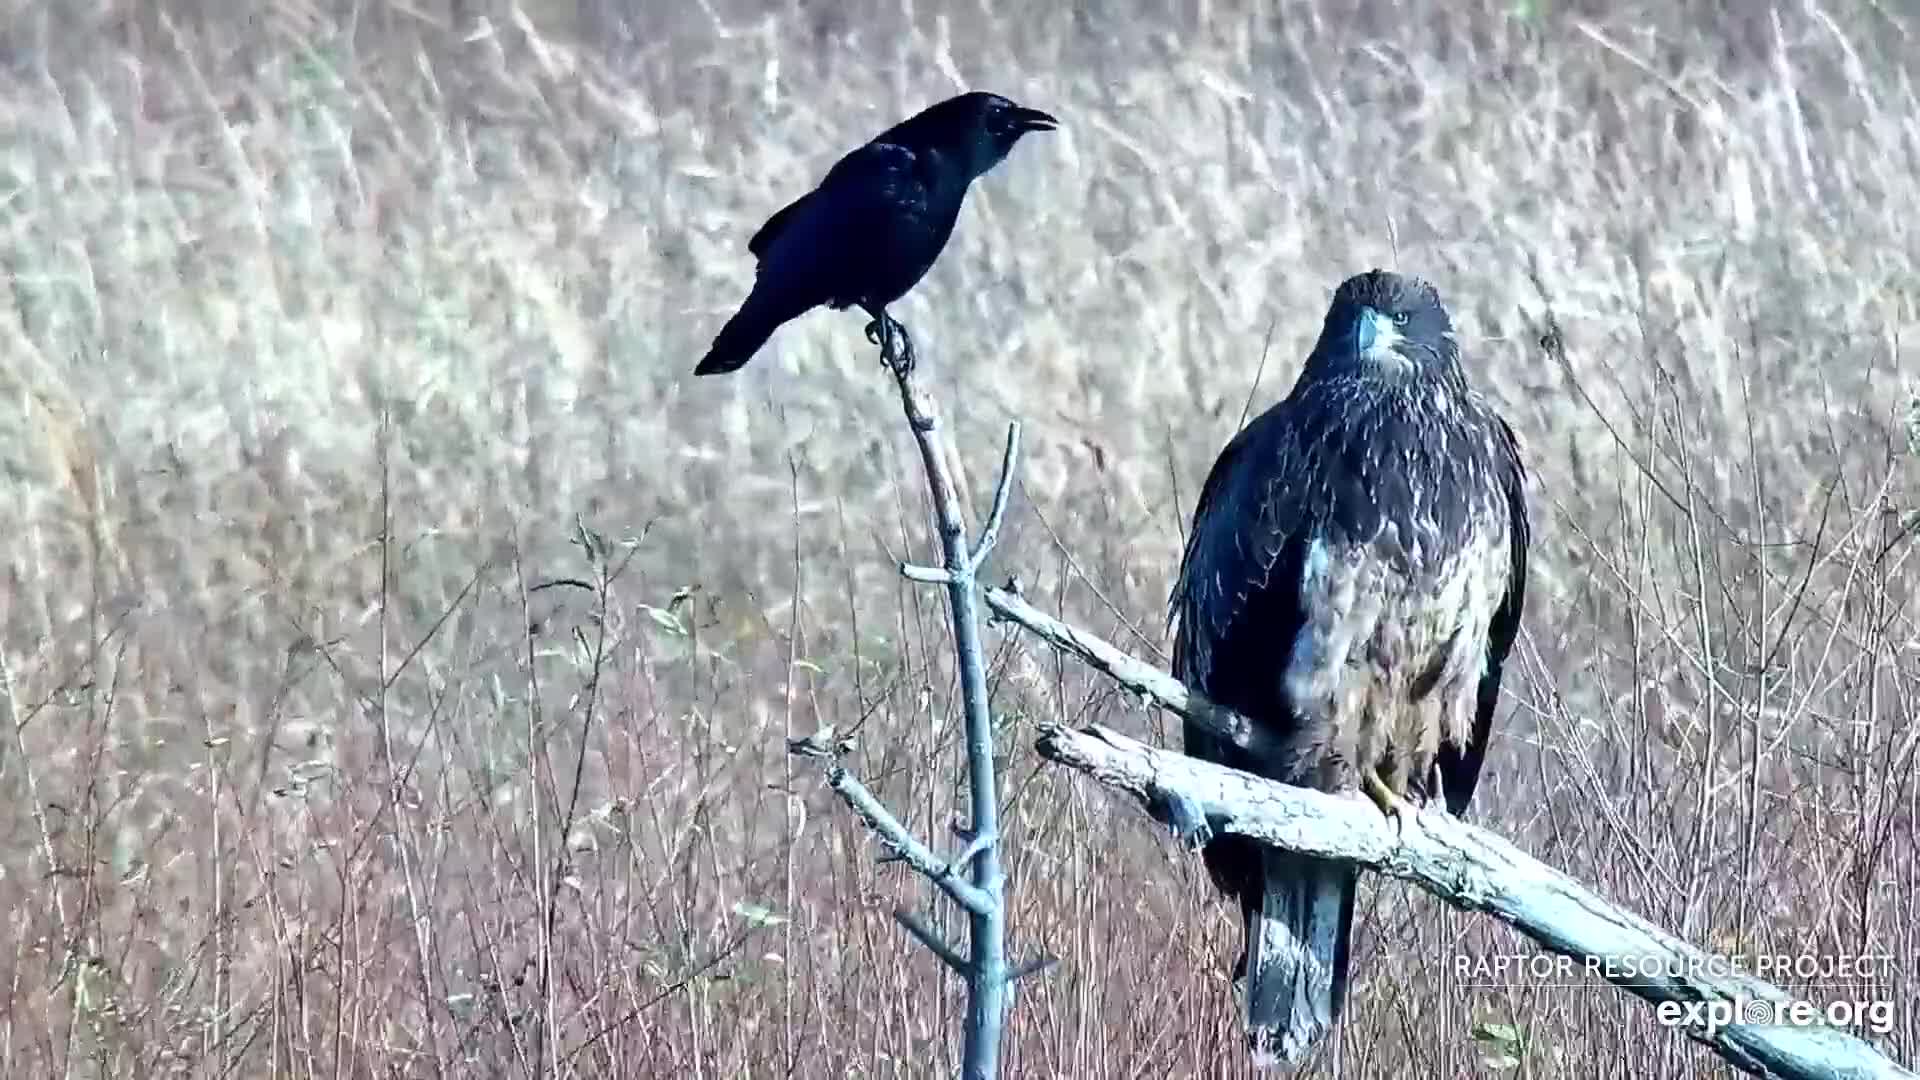 November 20, 2021: A bald eagle and a crow share the Flyway!